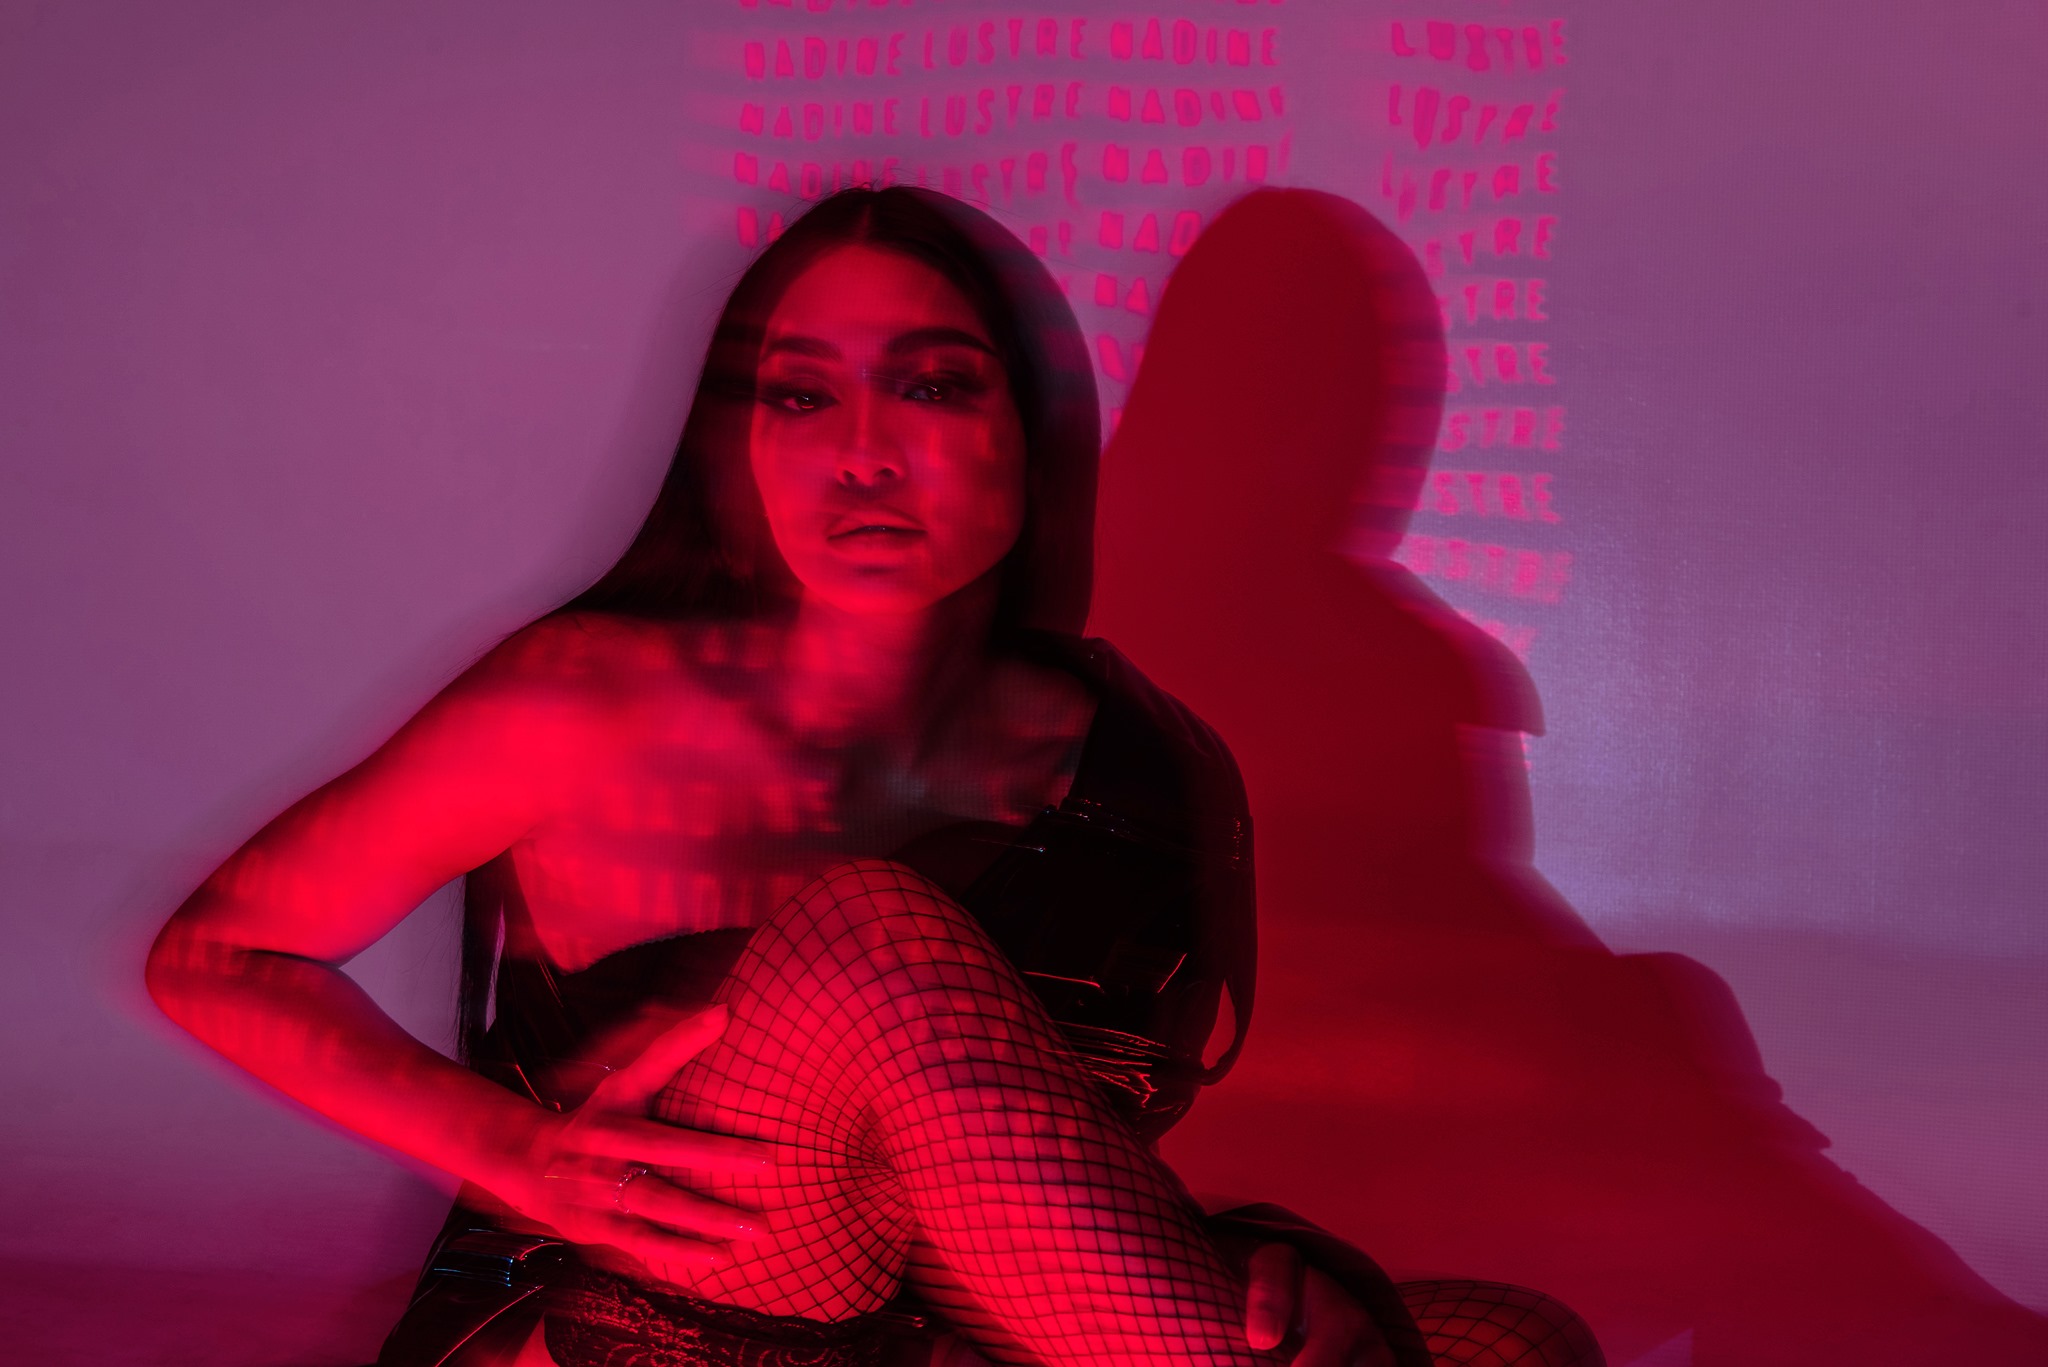 nadine-brings-her-wildest-dreams-to-life-on-her-new-album